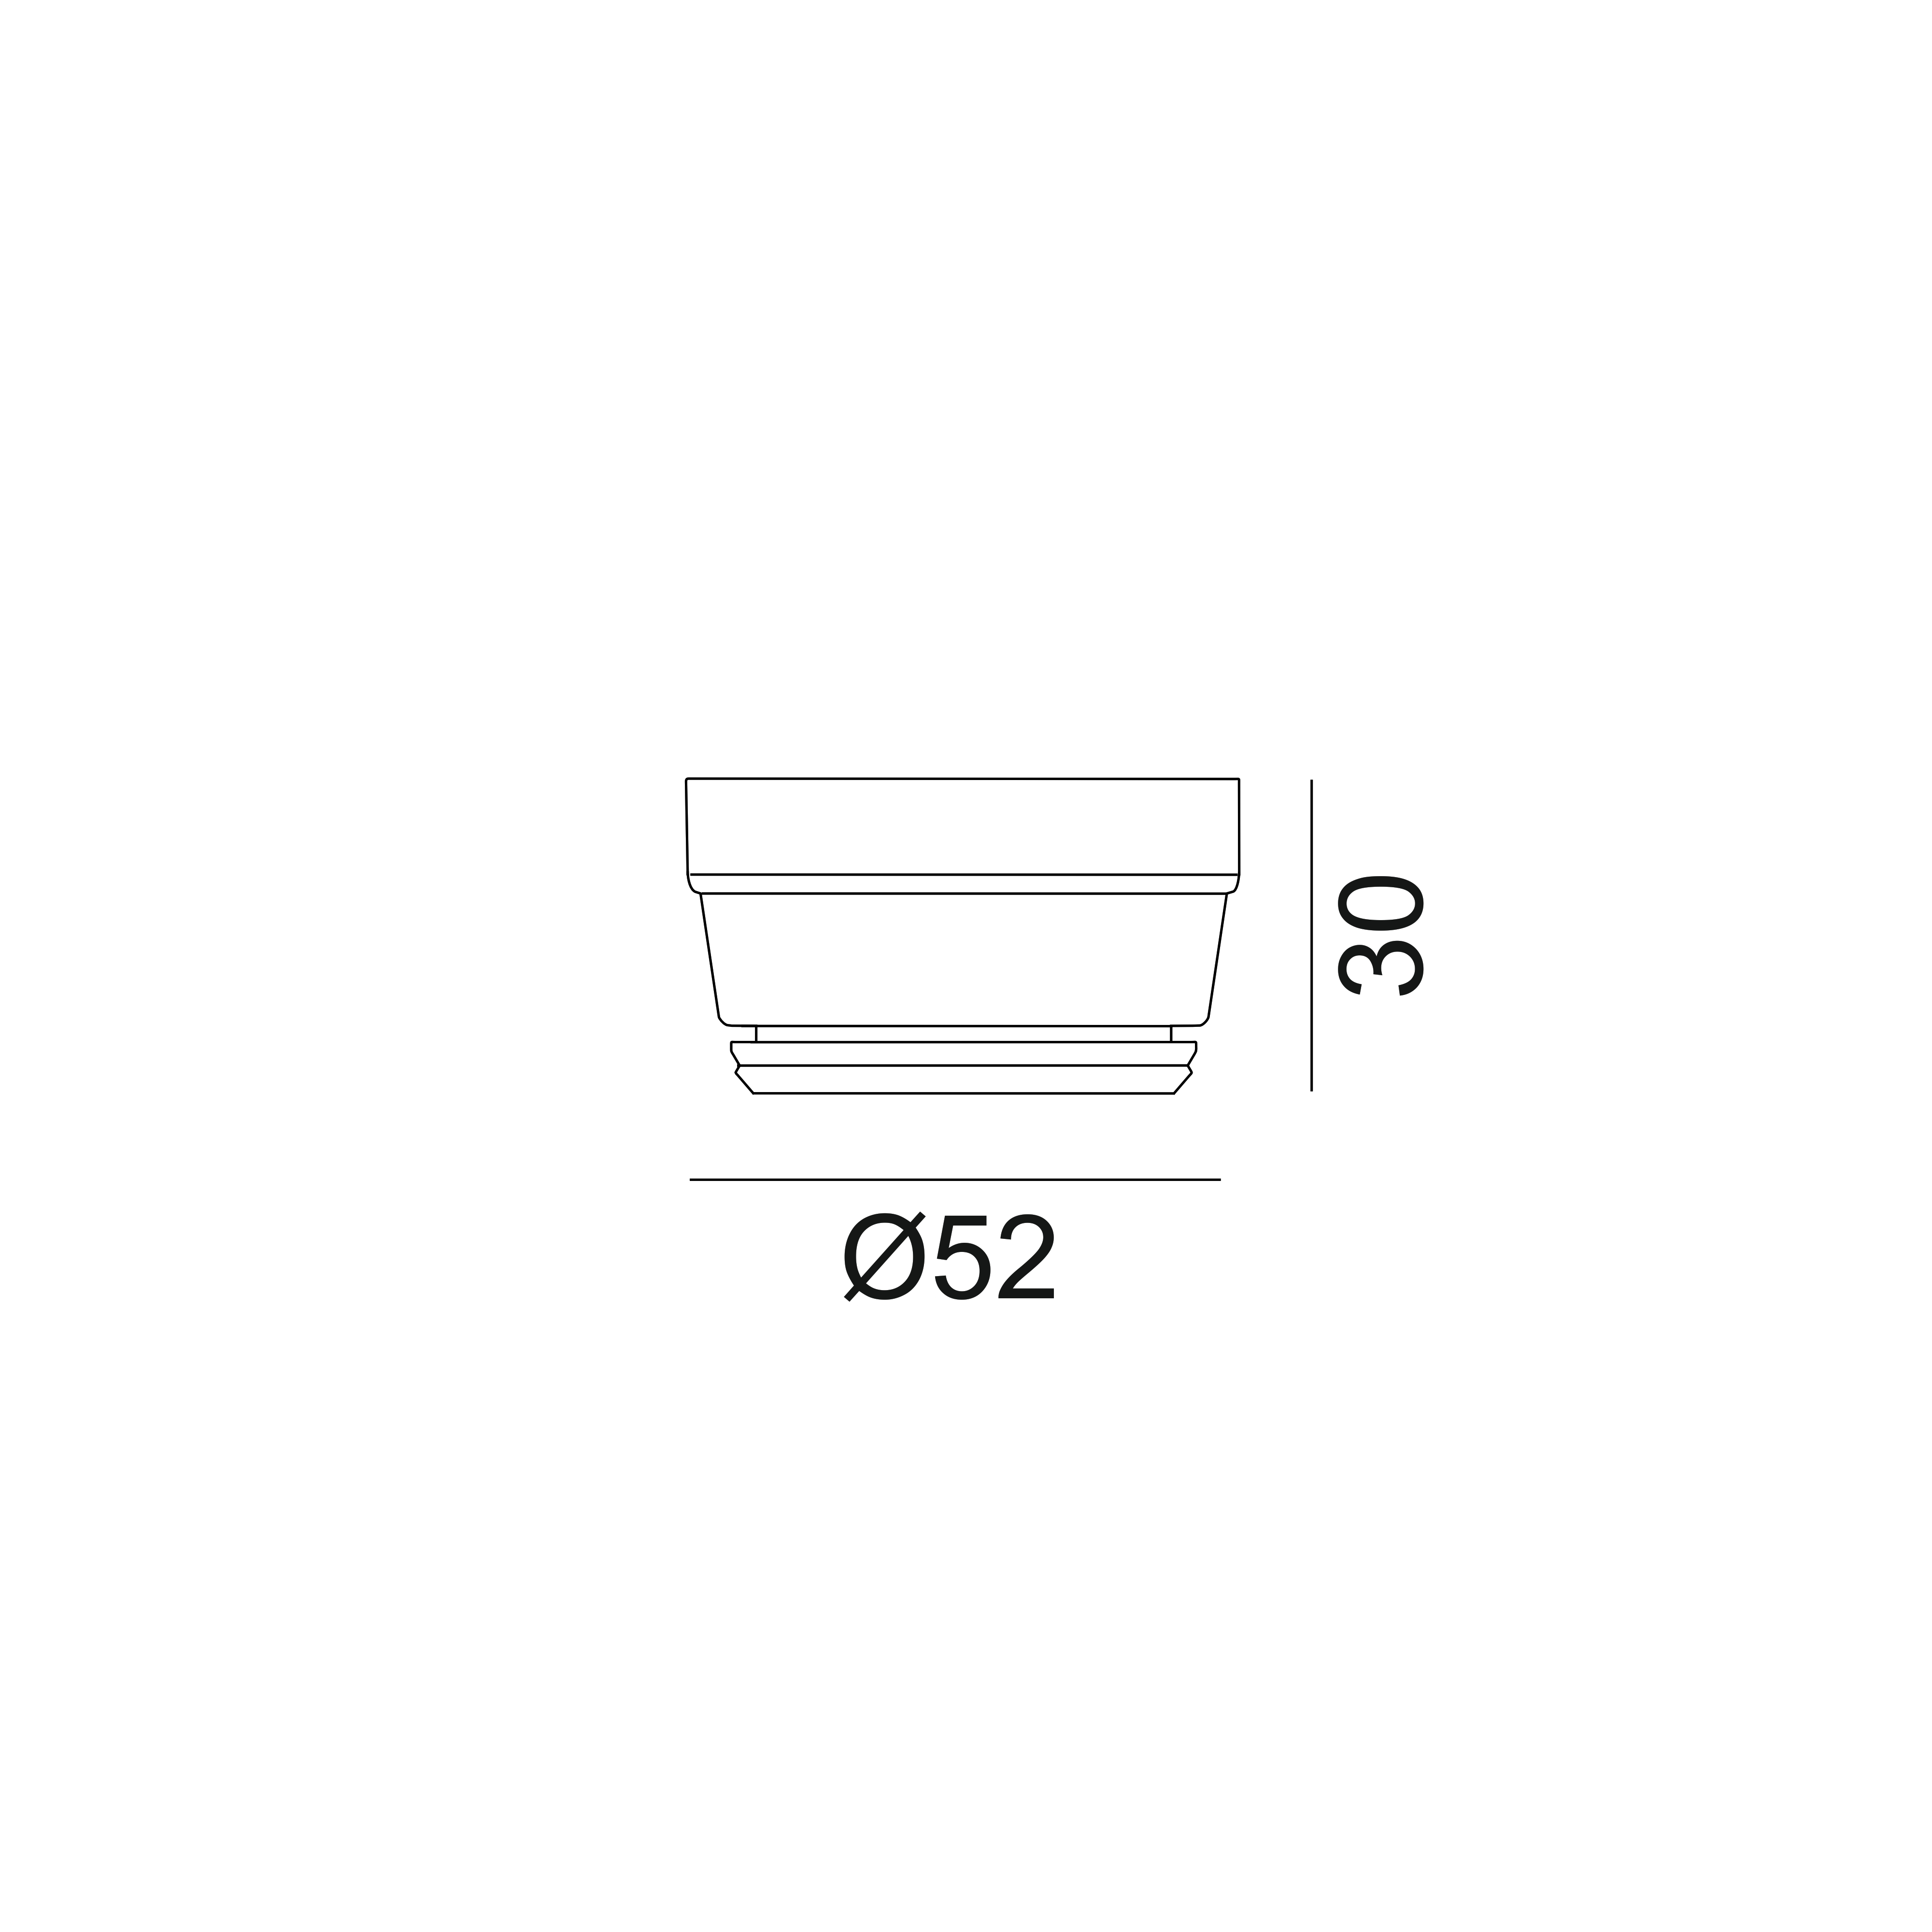 FOGGY COWER for series TUB M, D52mm, h30mm, mat white color - photo 2